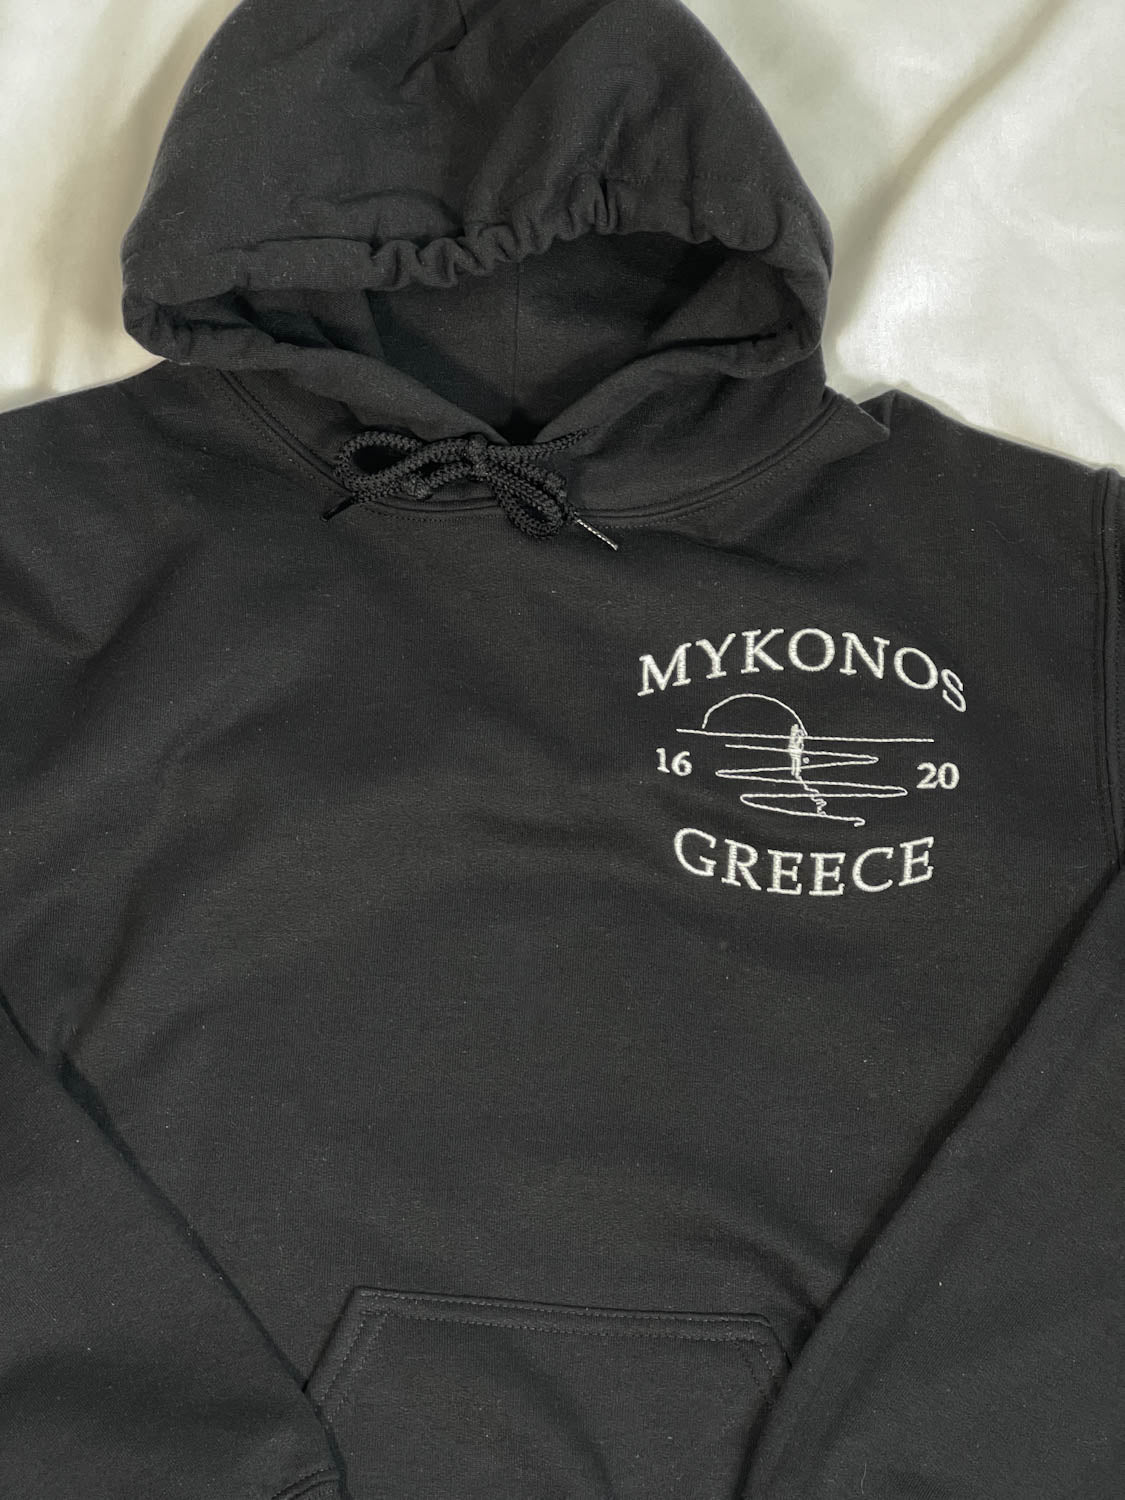 IMPERFECT / SALE - Mykonos Black Hoodie S Out The Purse